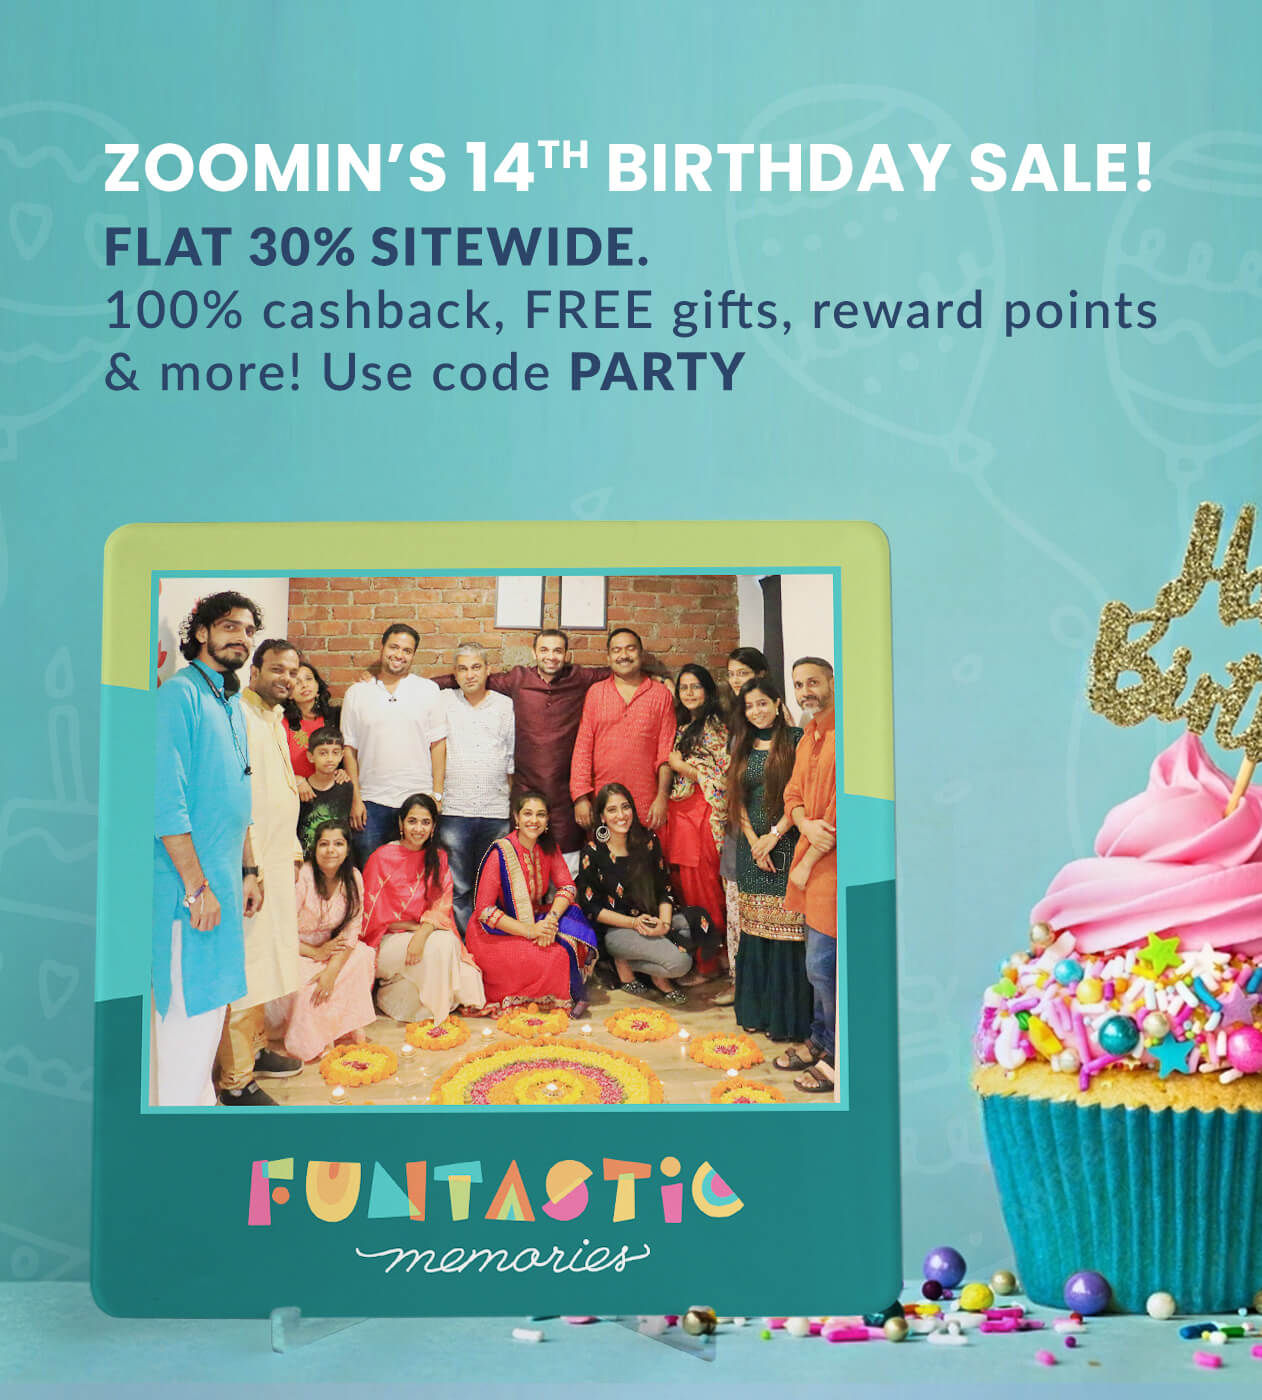 Zoomin’s 14th Birthday Party Sale!  FLAT 30% sitewide  100% cashback, FREE gifts, reward points & more!